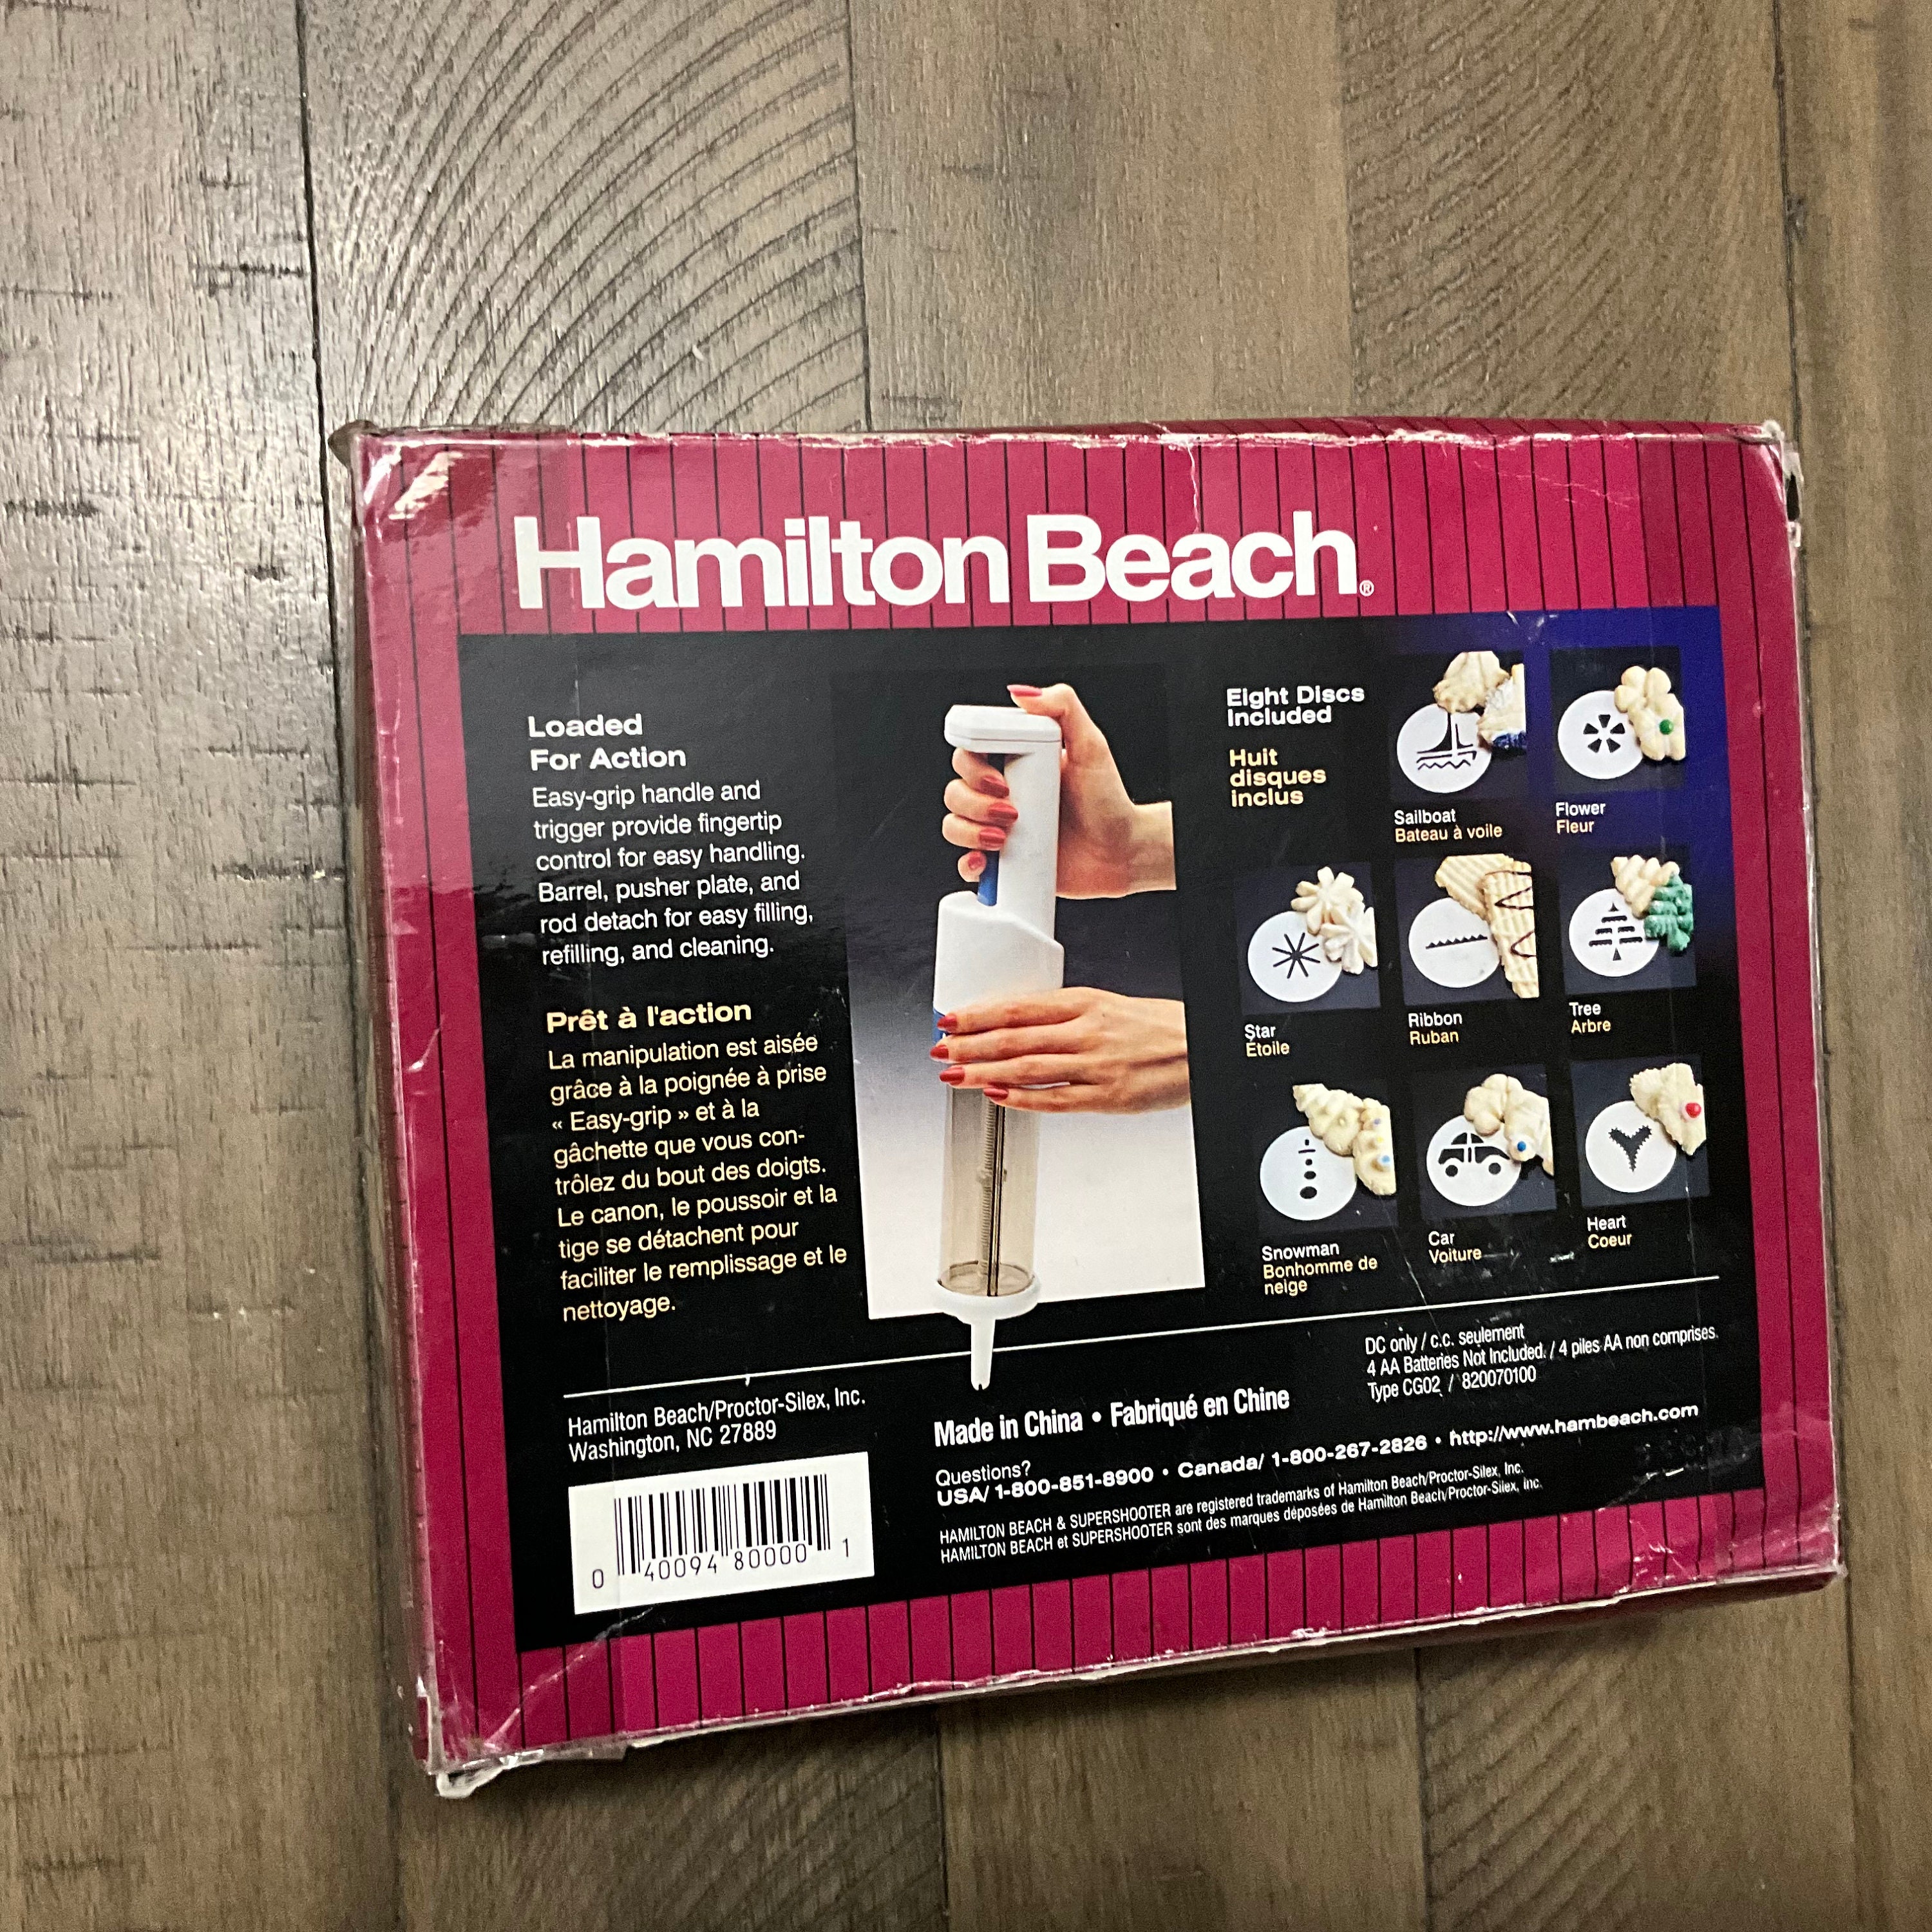 REPLACEMNET FOR Super Shooter Cookie Press & Food Decorator by Hamilton  Beach: Hamilton Beach Super Shooter: Home & Kitchen 